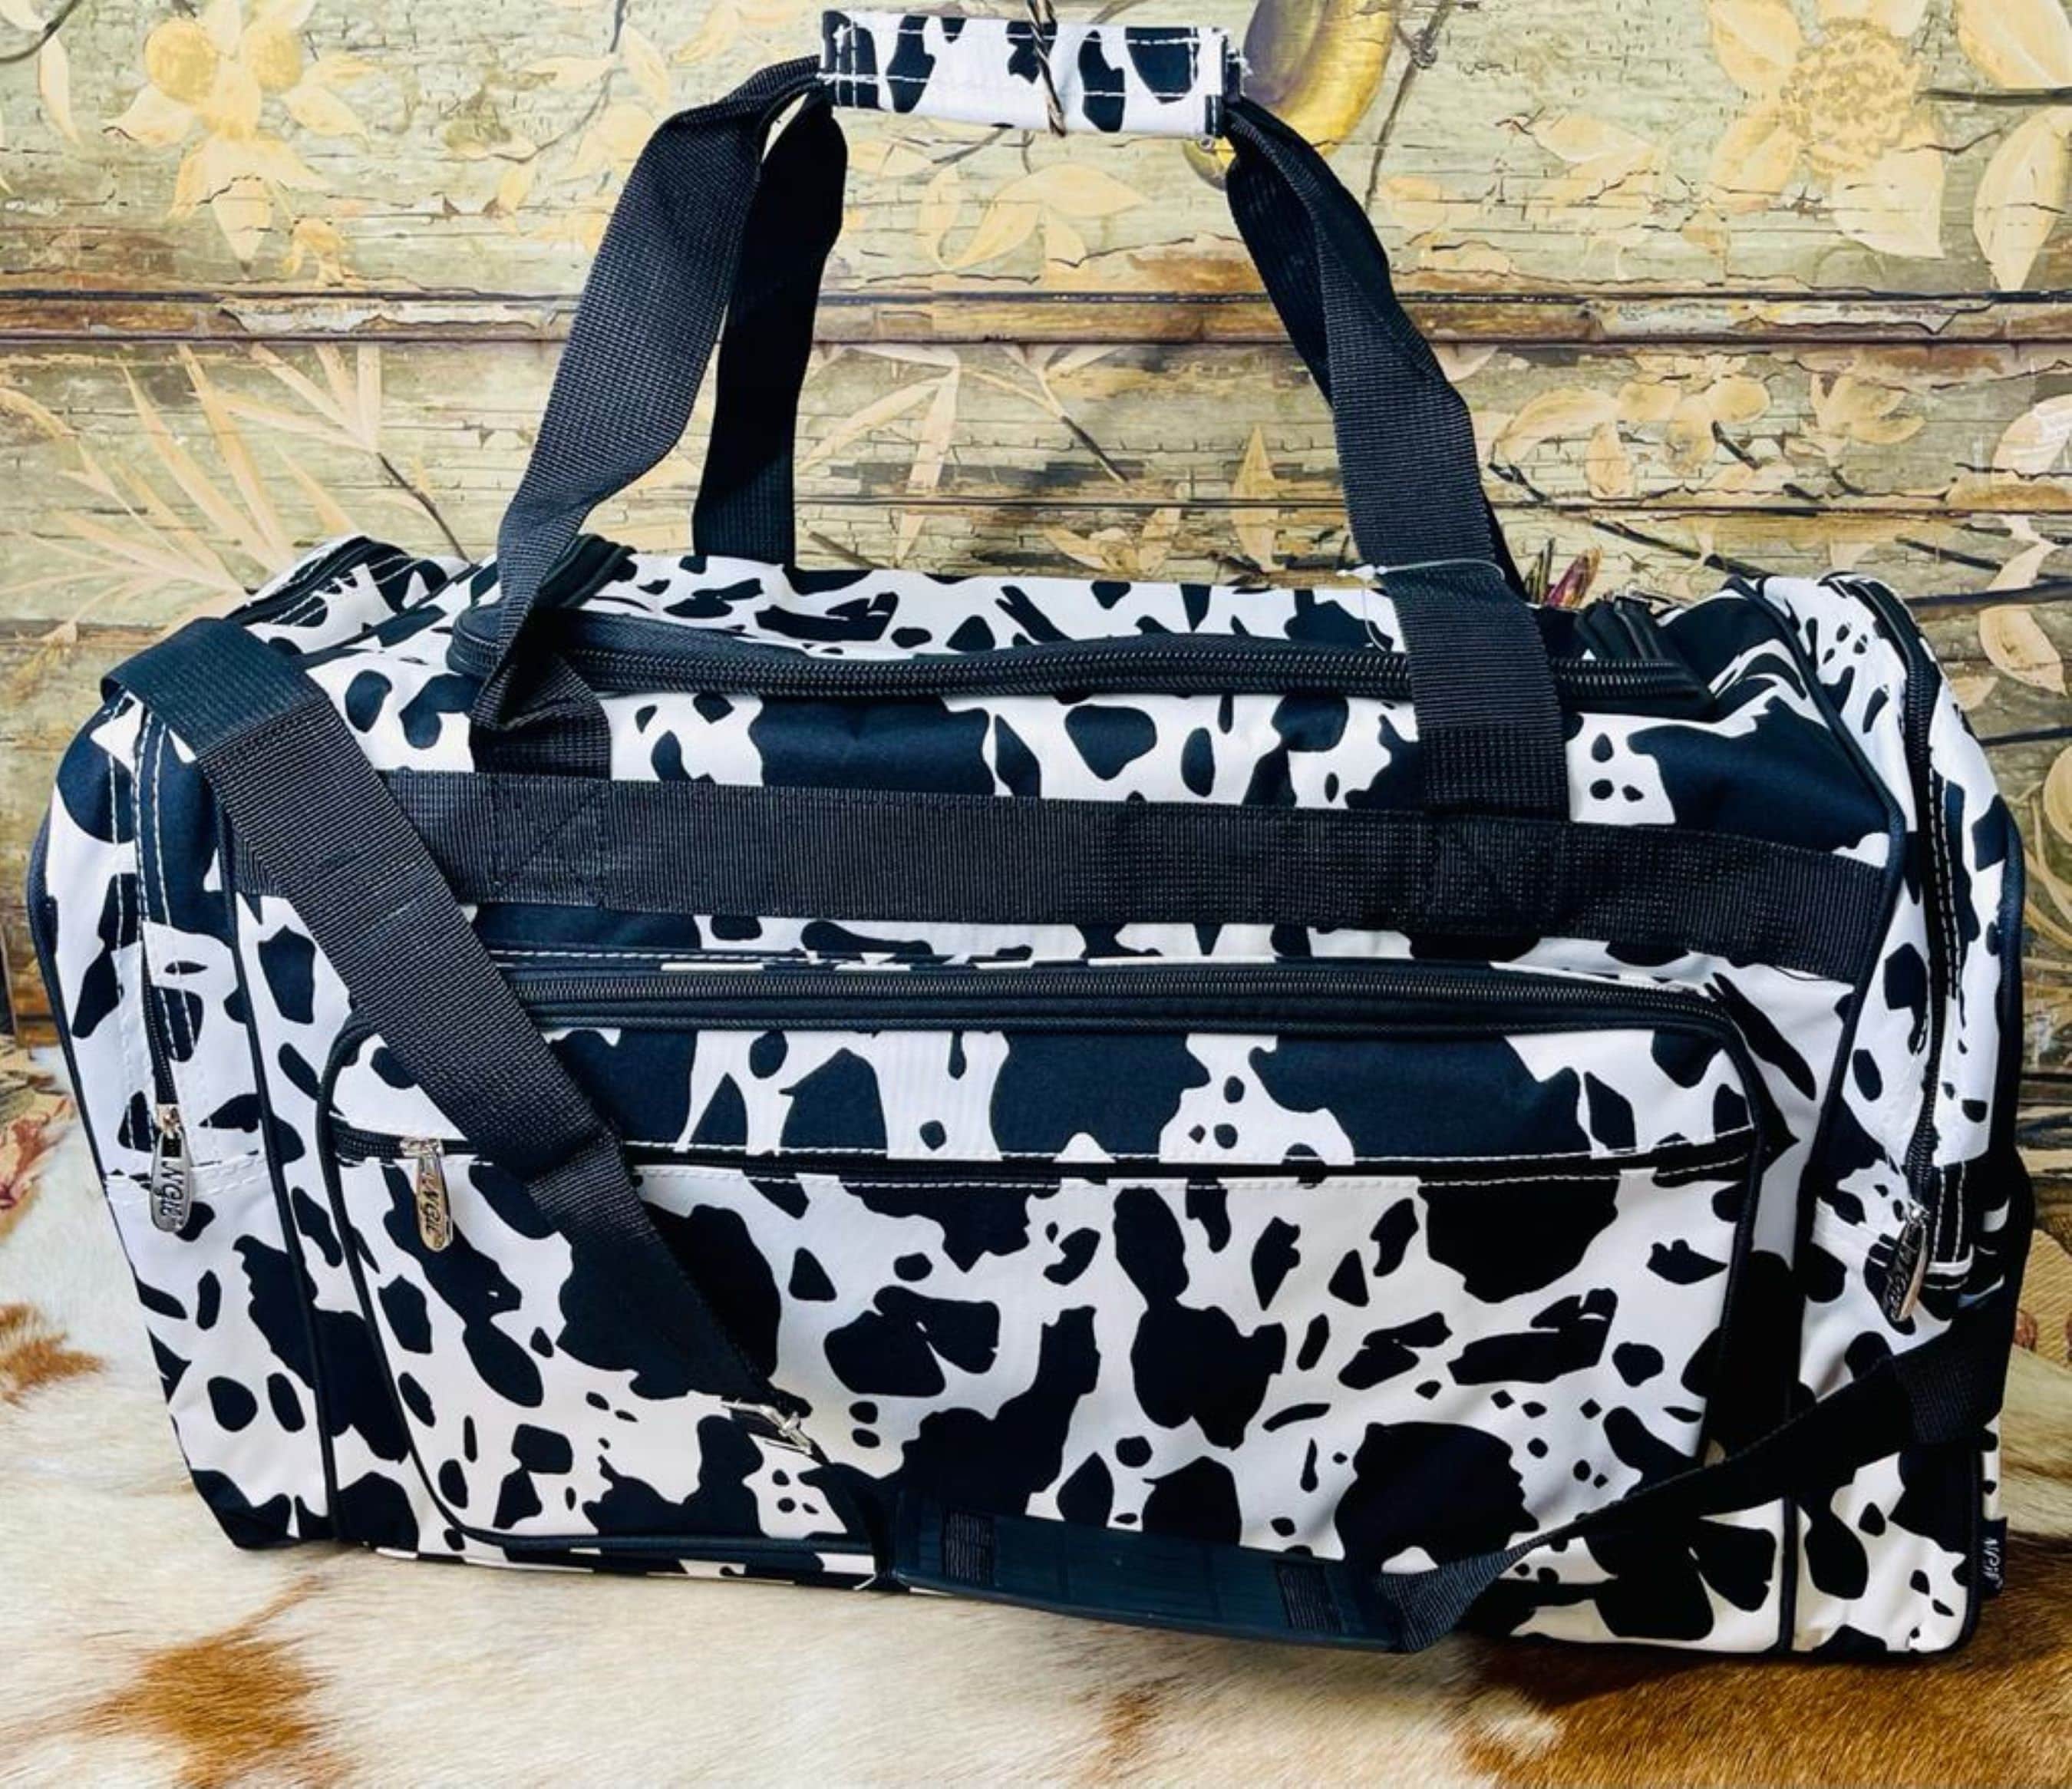 Western Cow Print Duffel/Overnight Bag/Gym Bag - Personalized/Monogrammed